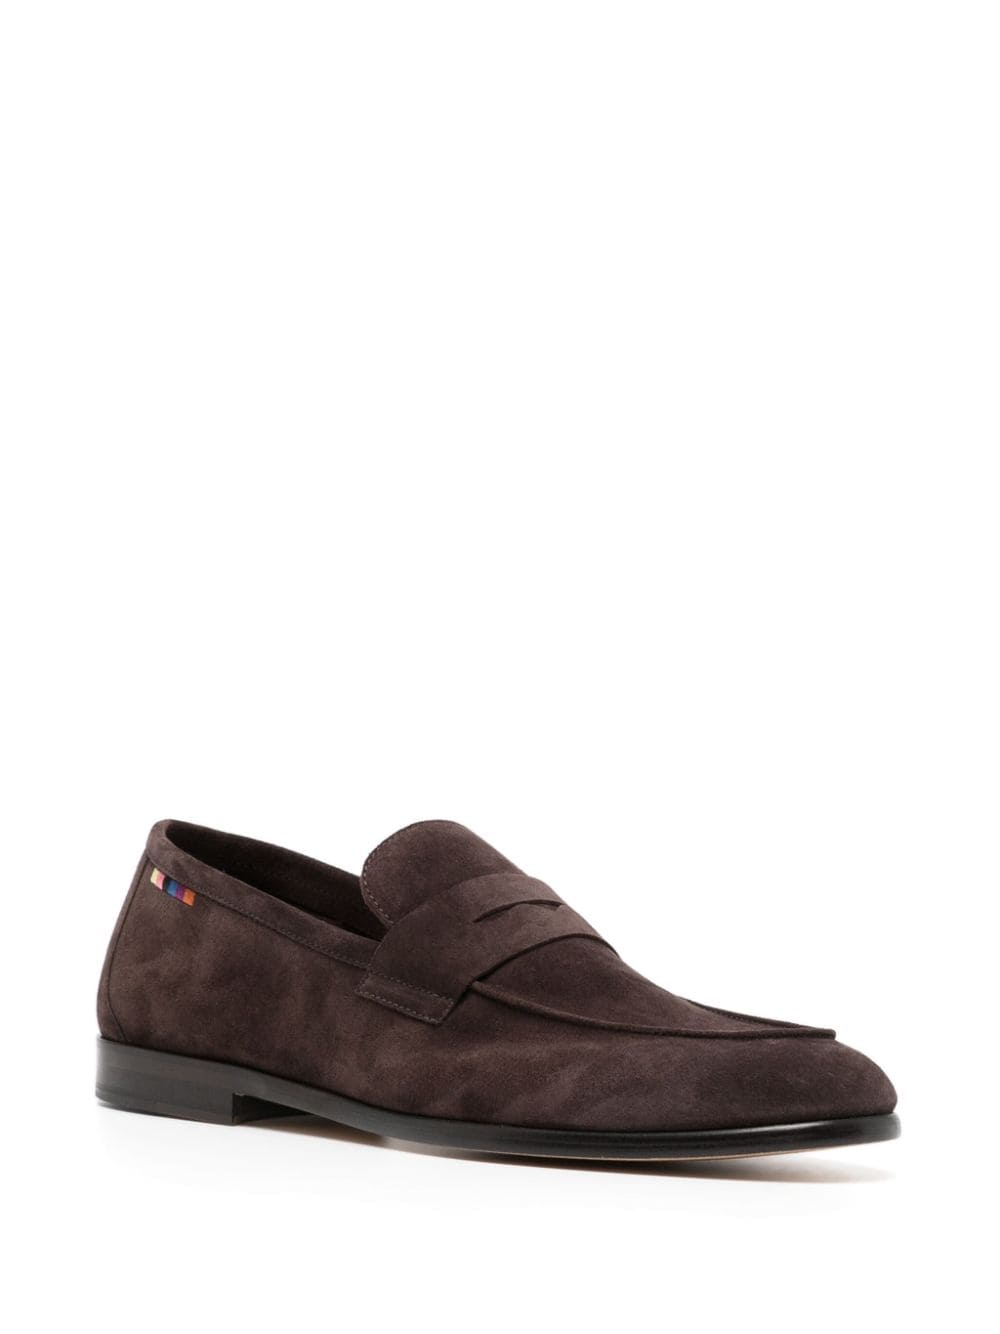 Paul Smith Figaro suede loafers - Bruin